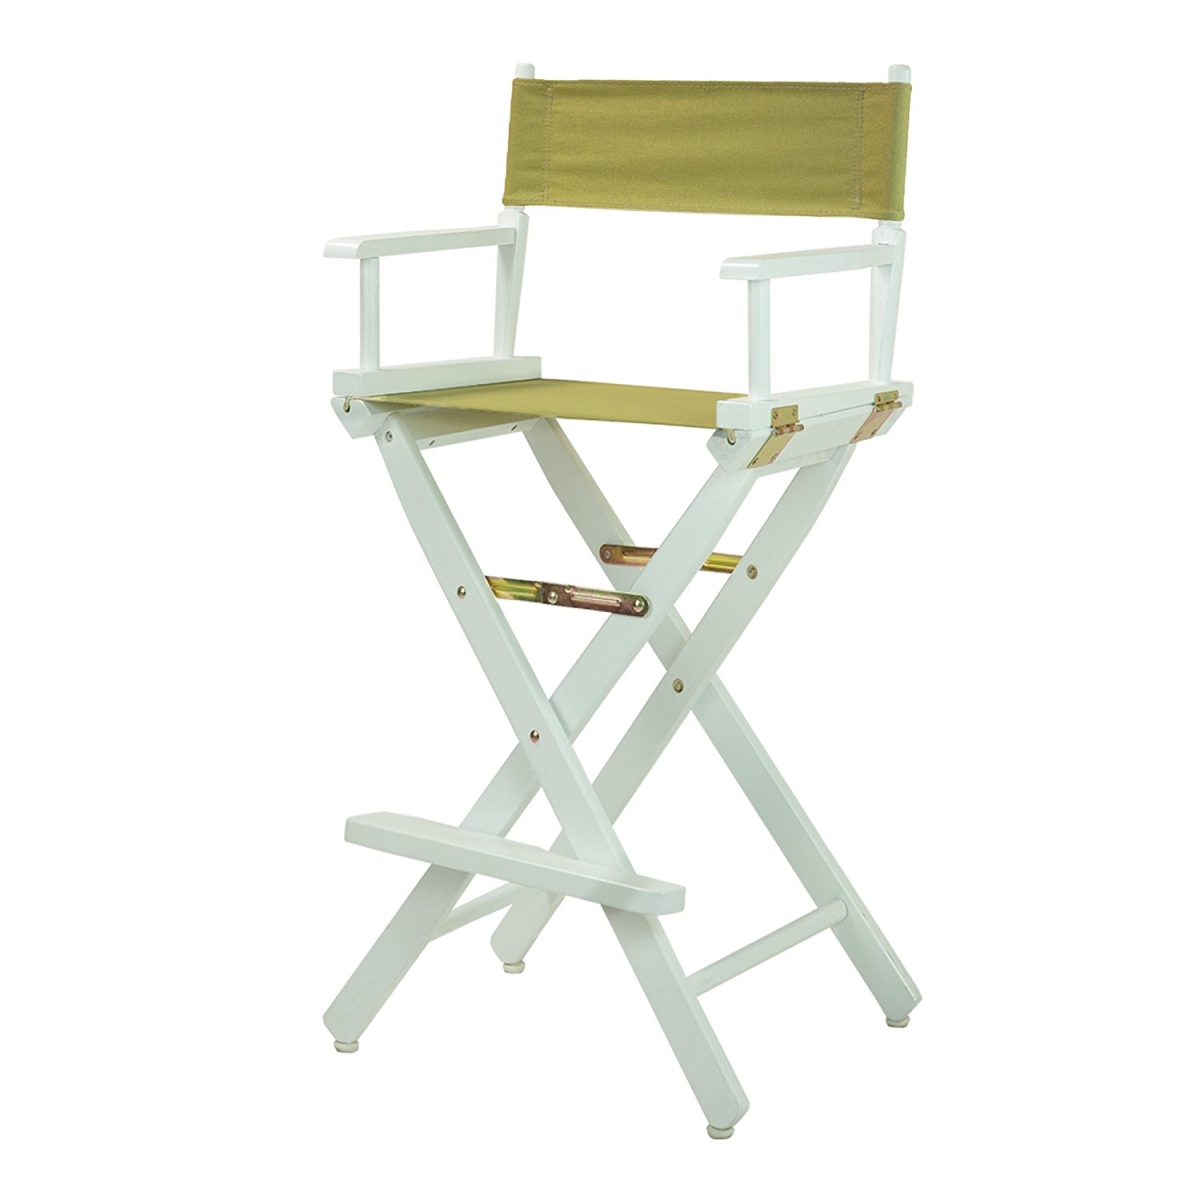 230-01-021-100 30 In. Directors Chair White Frame With Olive Canvas